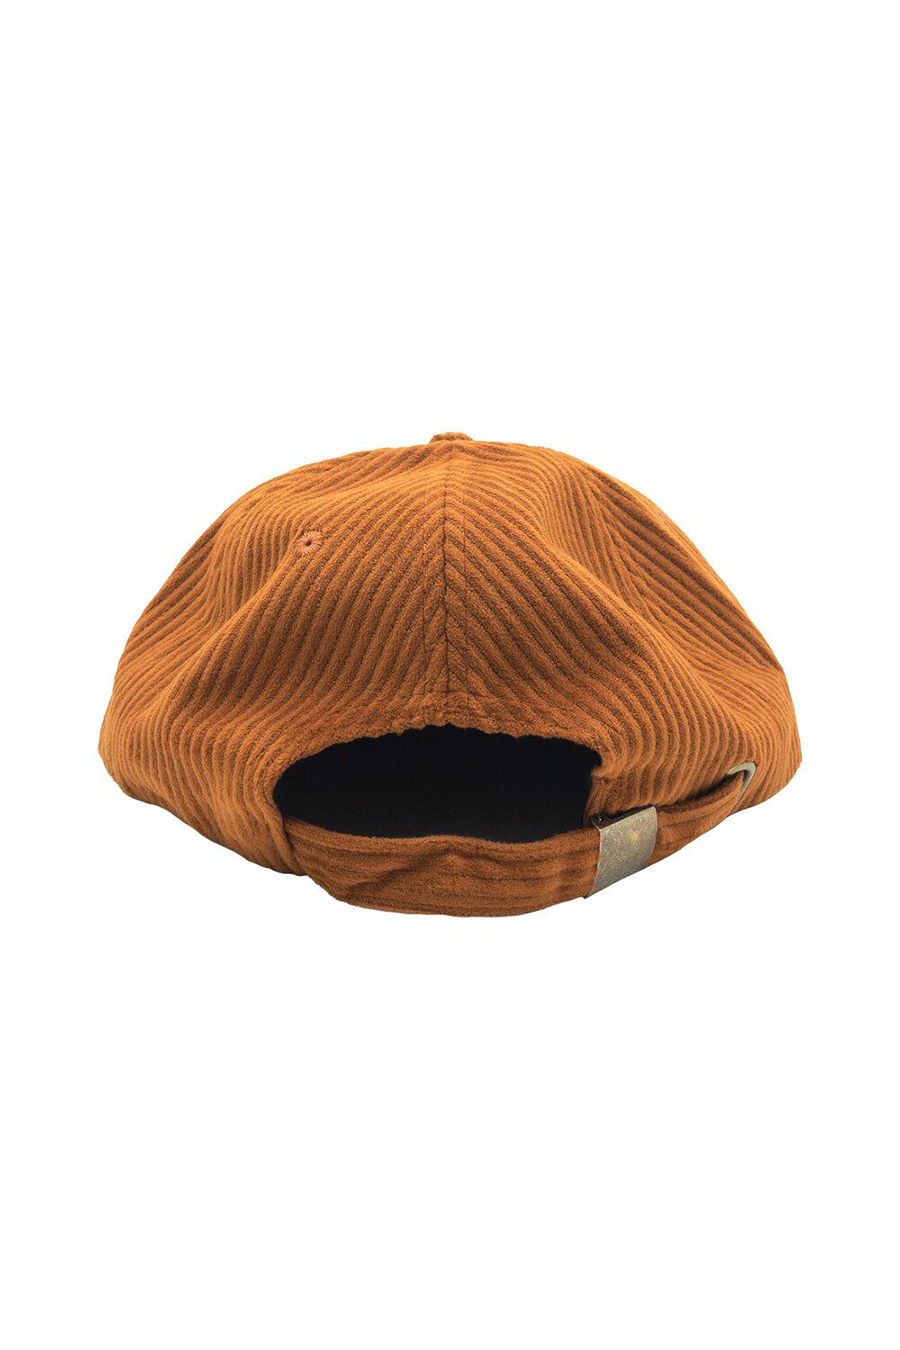 Don't Trip Fat Corduroy Hat | Rust - Main Image Number 2 of 2